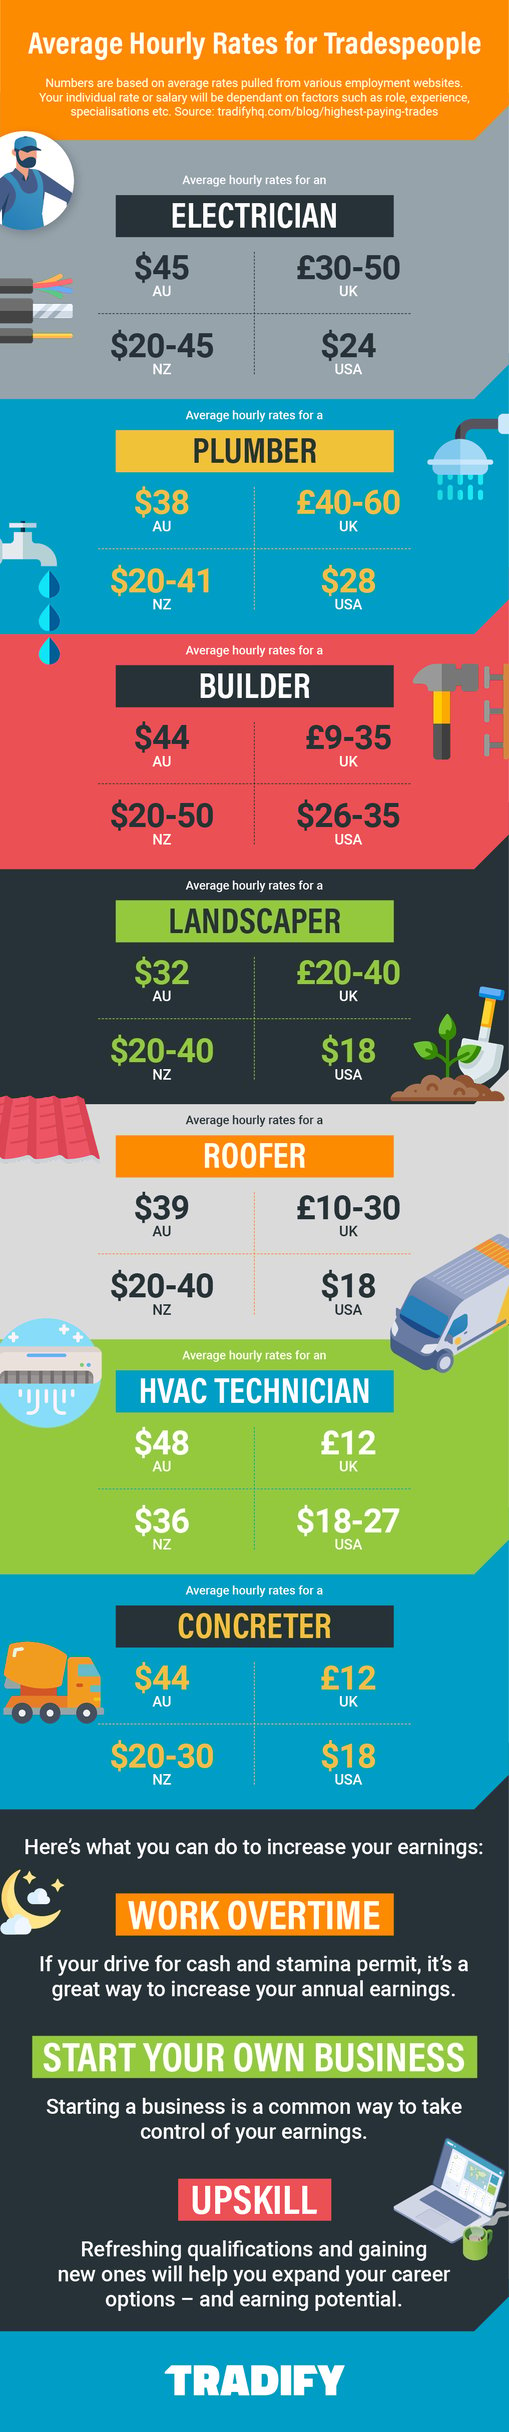 Tradify infographic - hourly rates